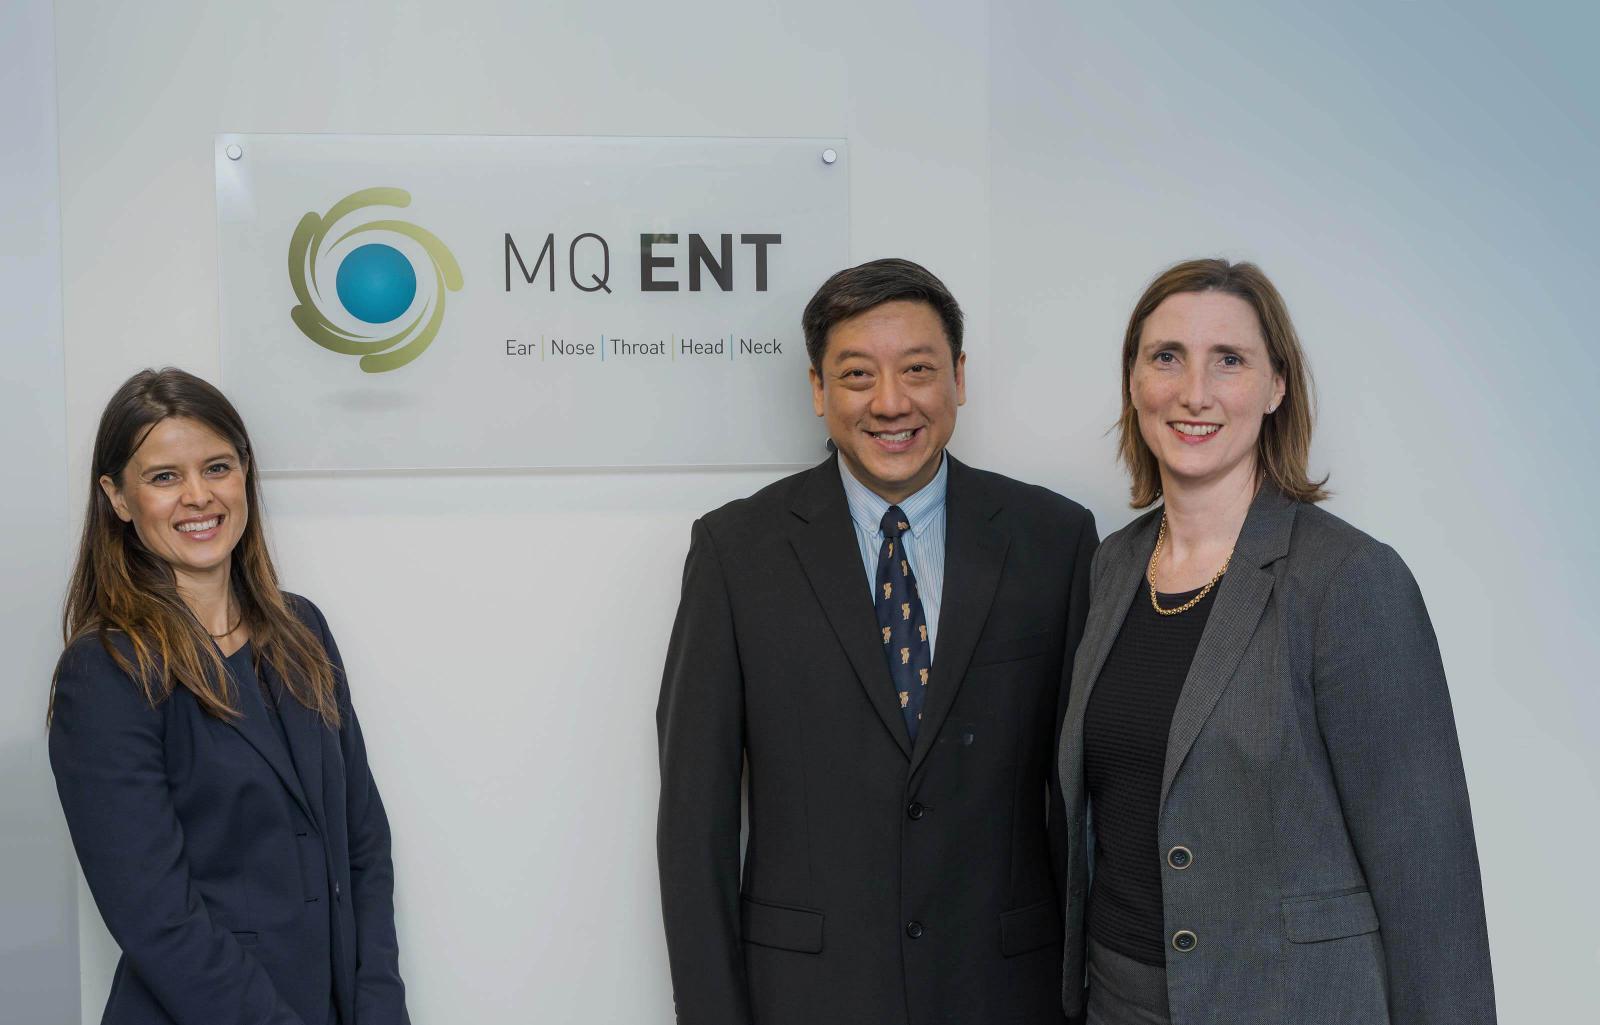 Team-members in front of MQ ENT sign